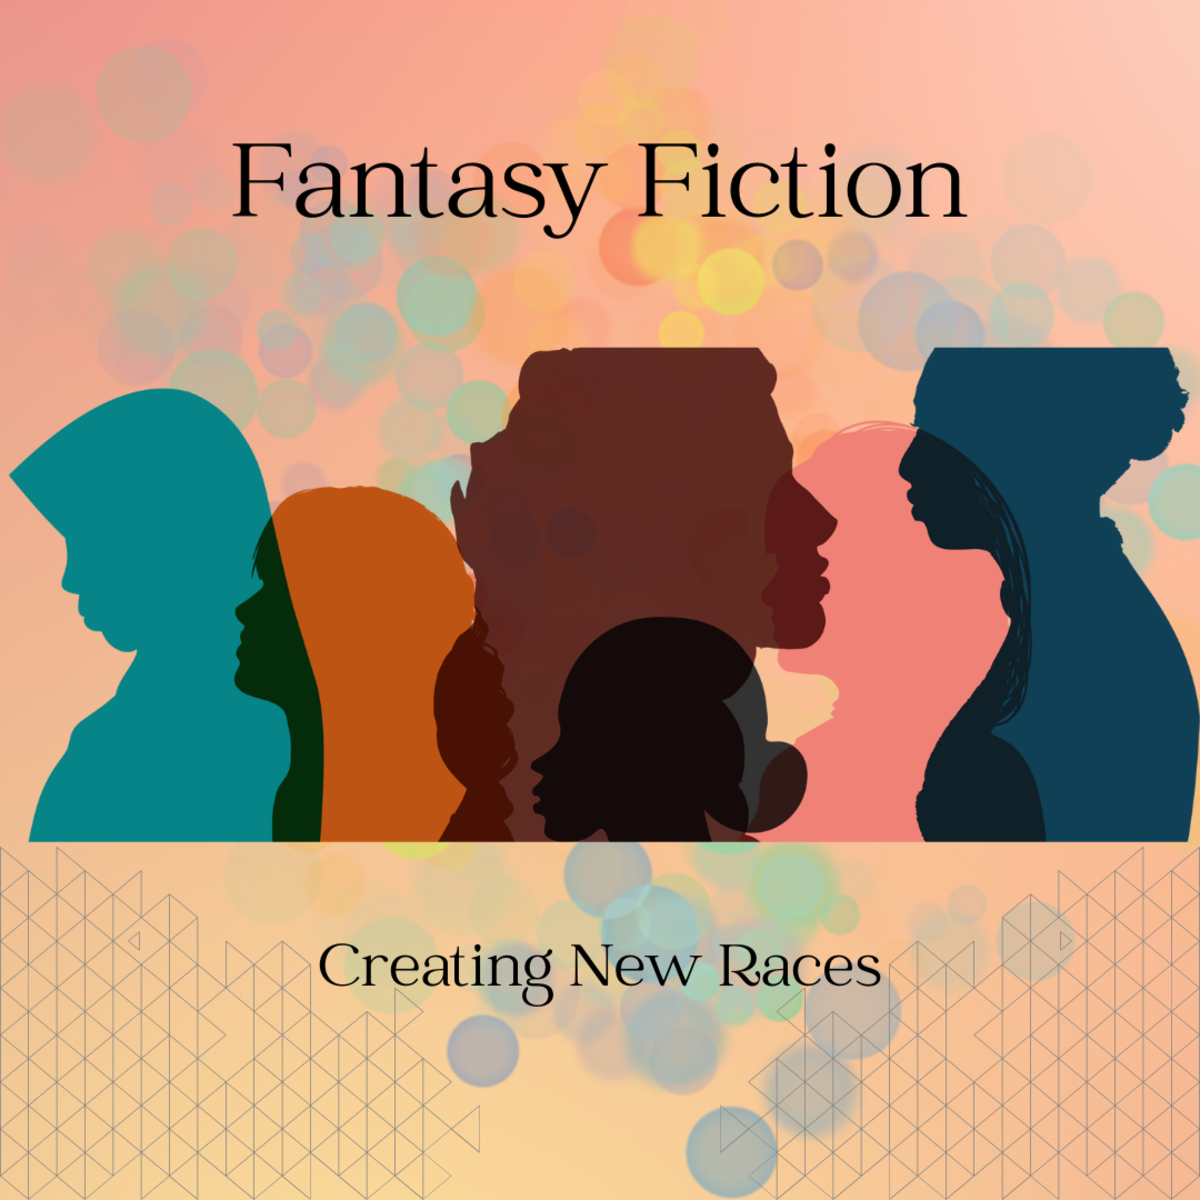 Creating New Races in Fantasy Fiction